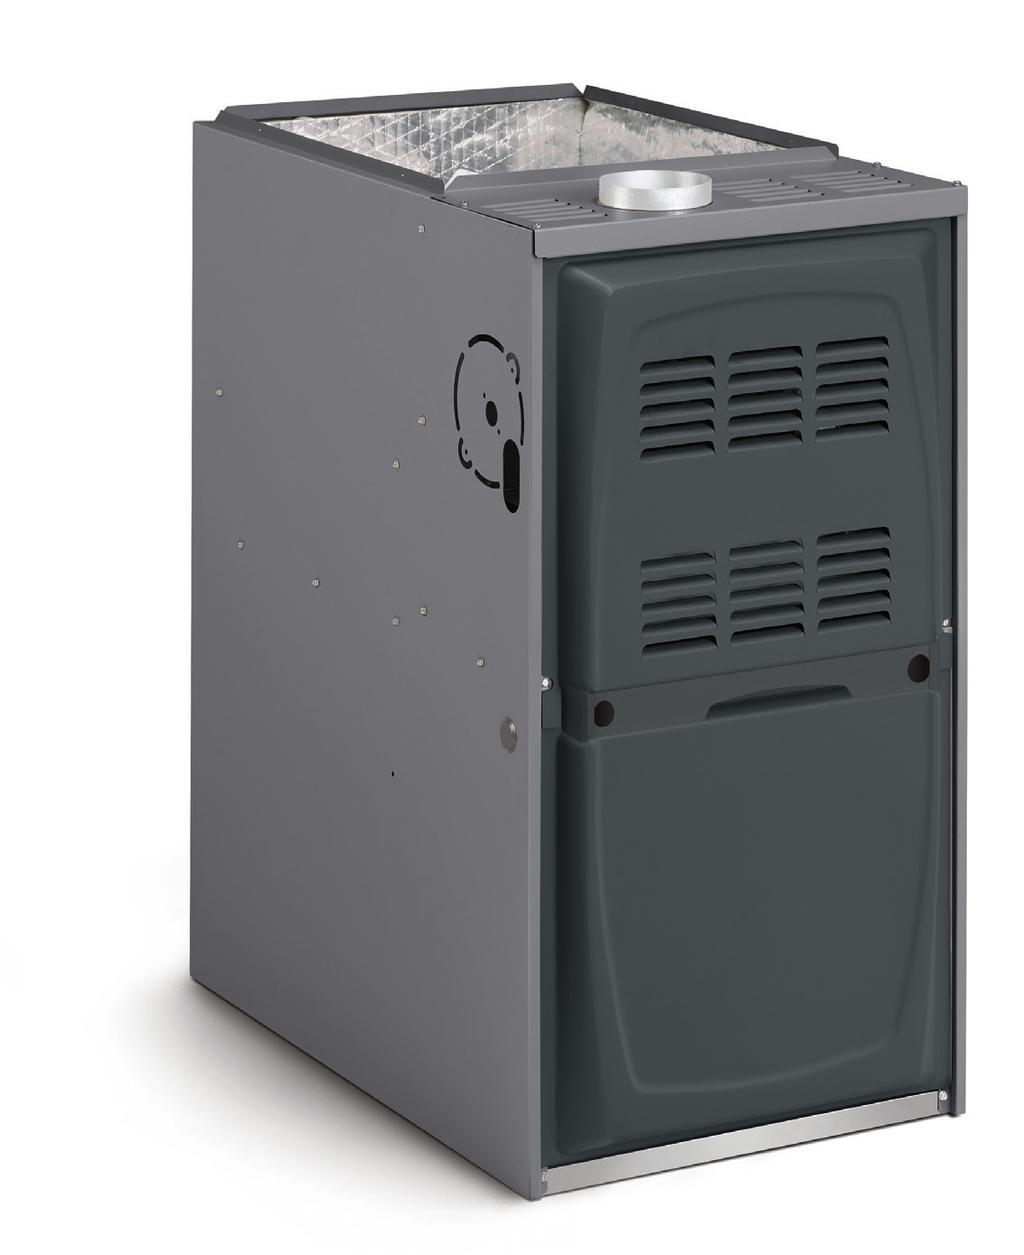 A802V PRODUCT SPECIFICATIONS 2-STAGE VARIABLE SPEED GAS FURNACE FORM NO.